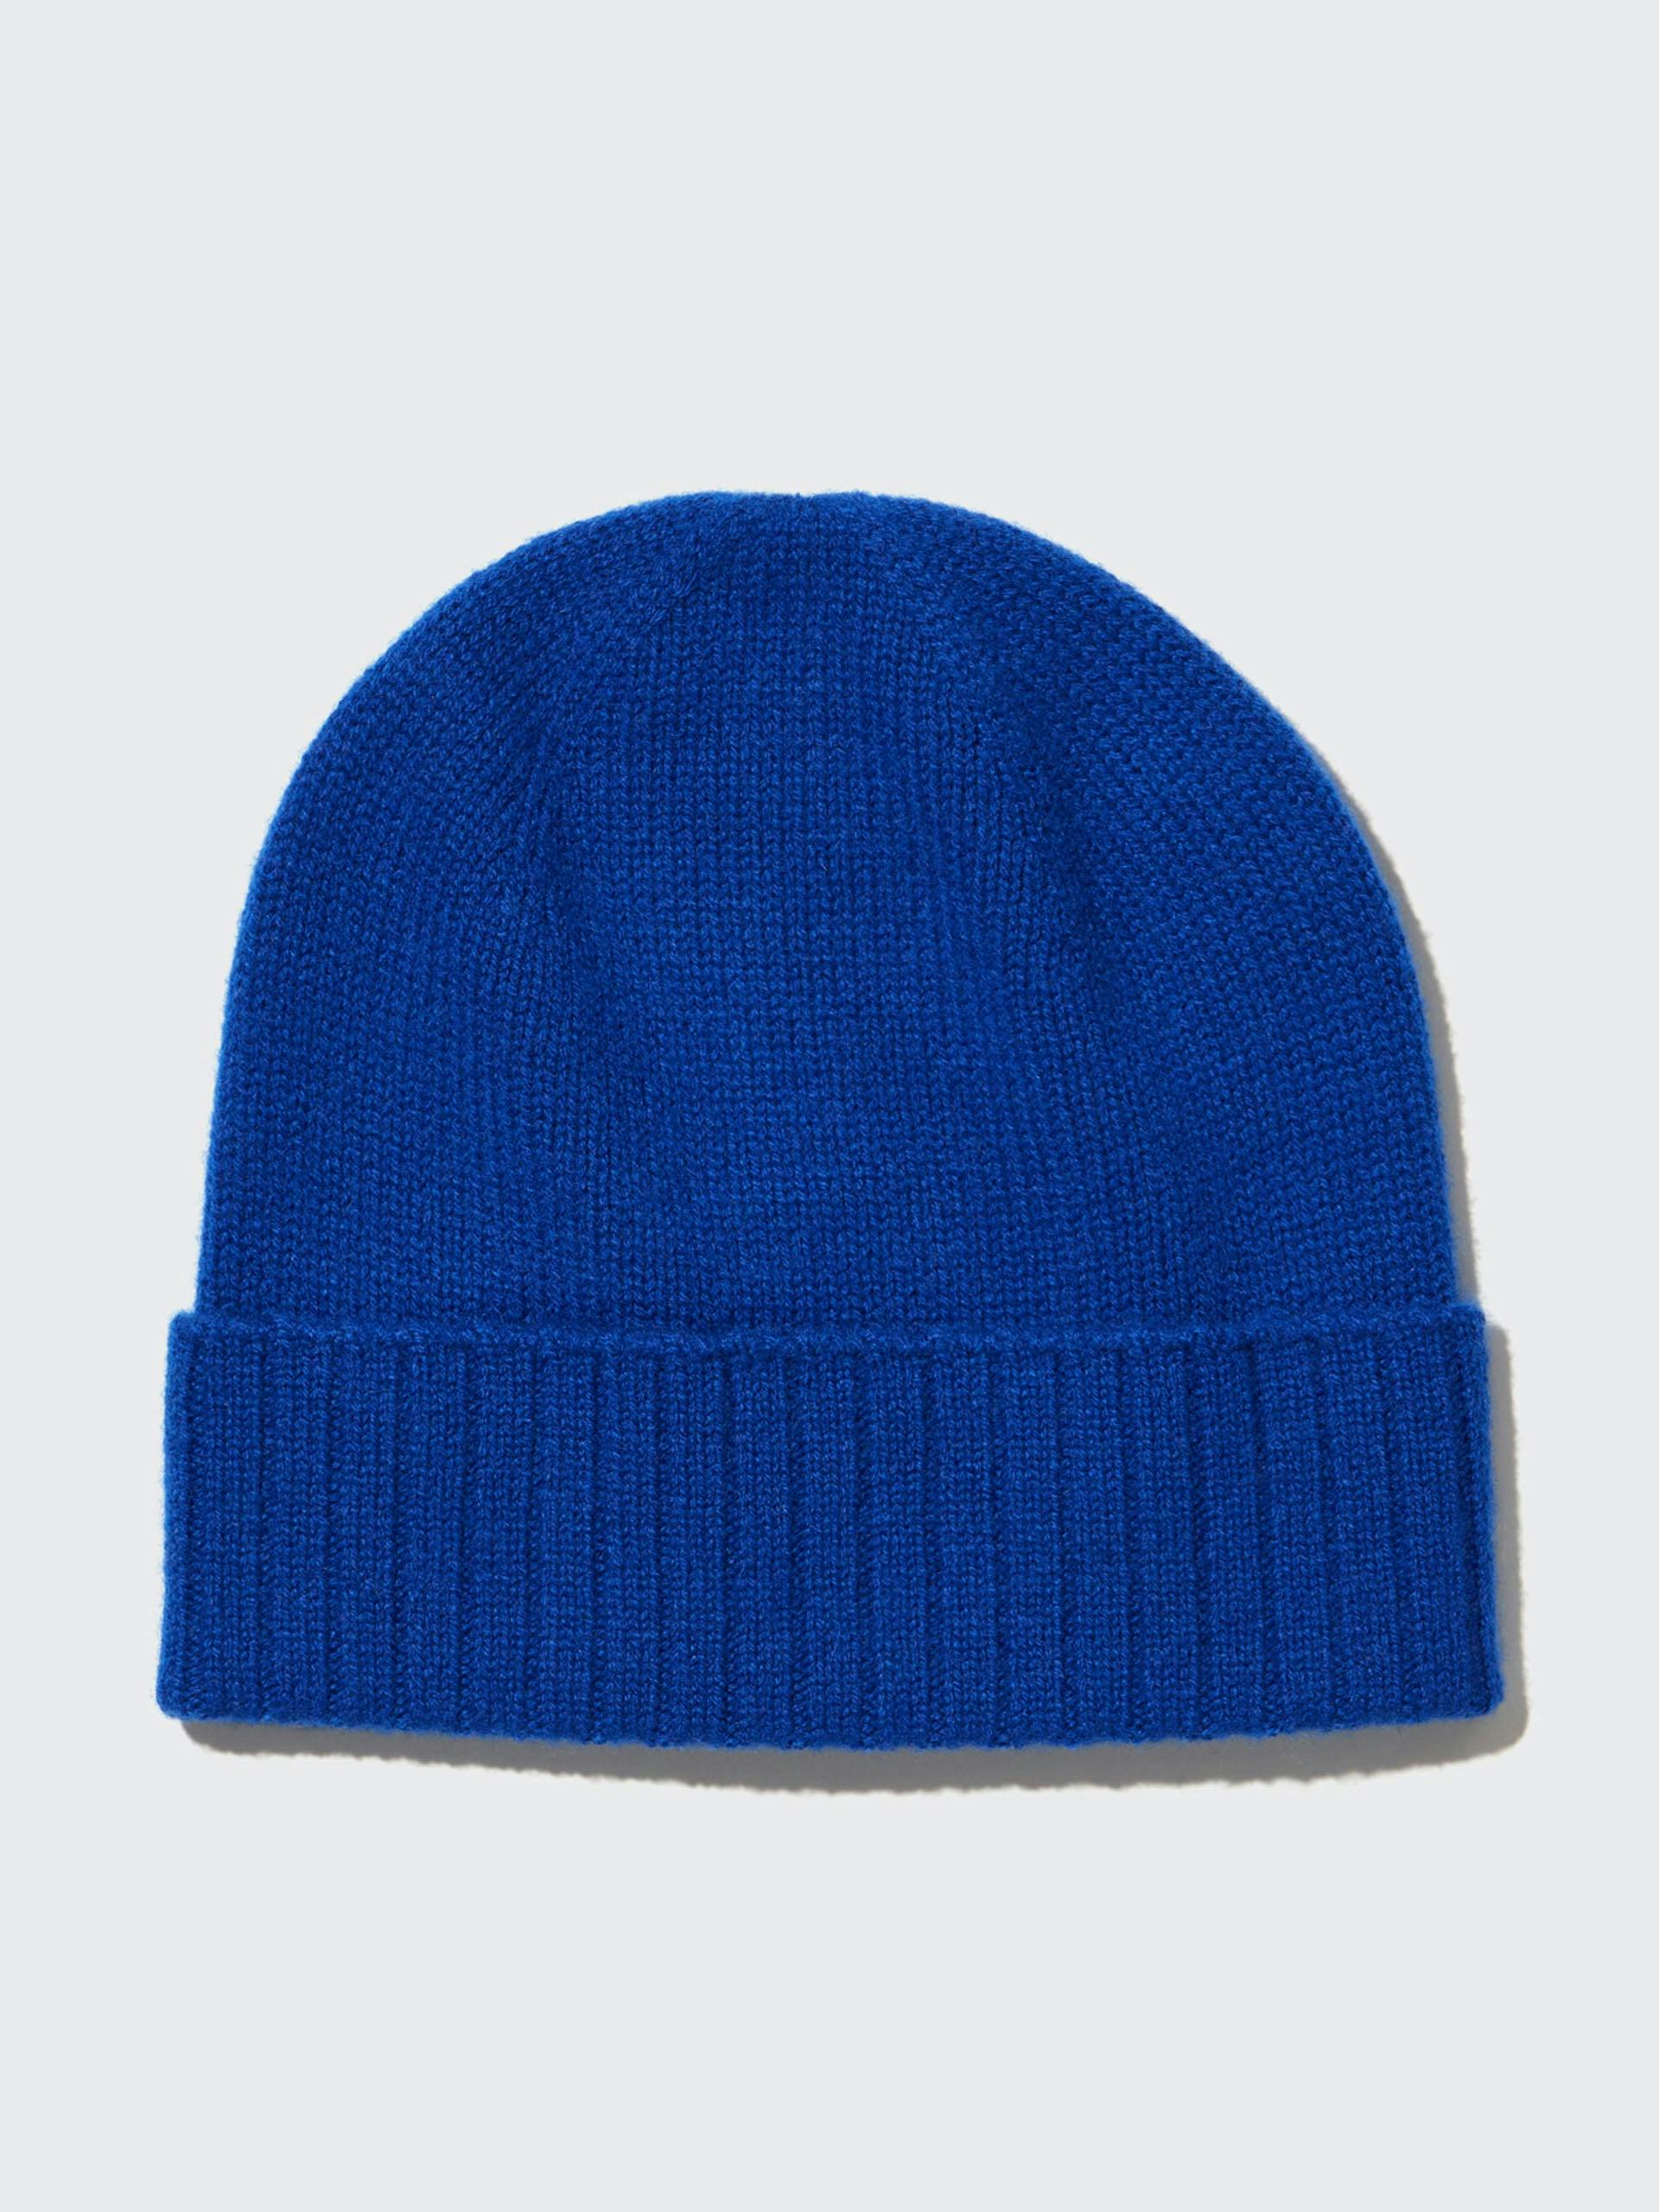 Cashmere blue knitted beanie hat